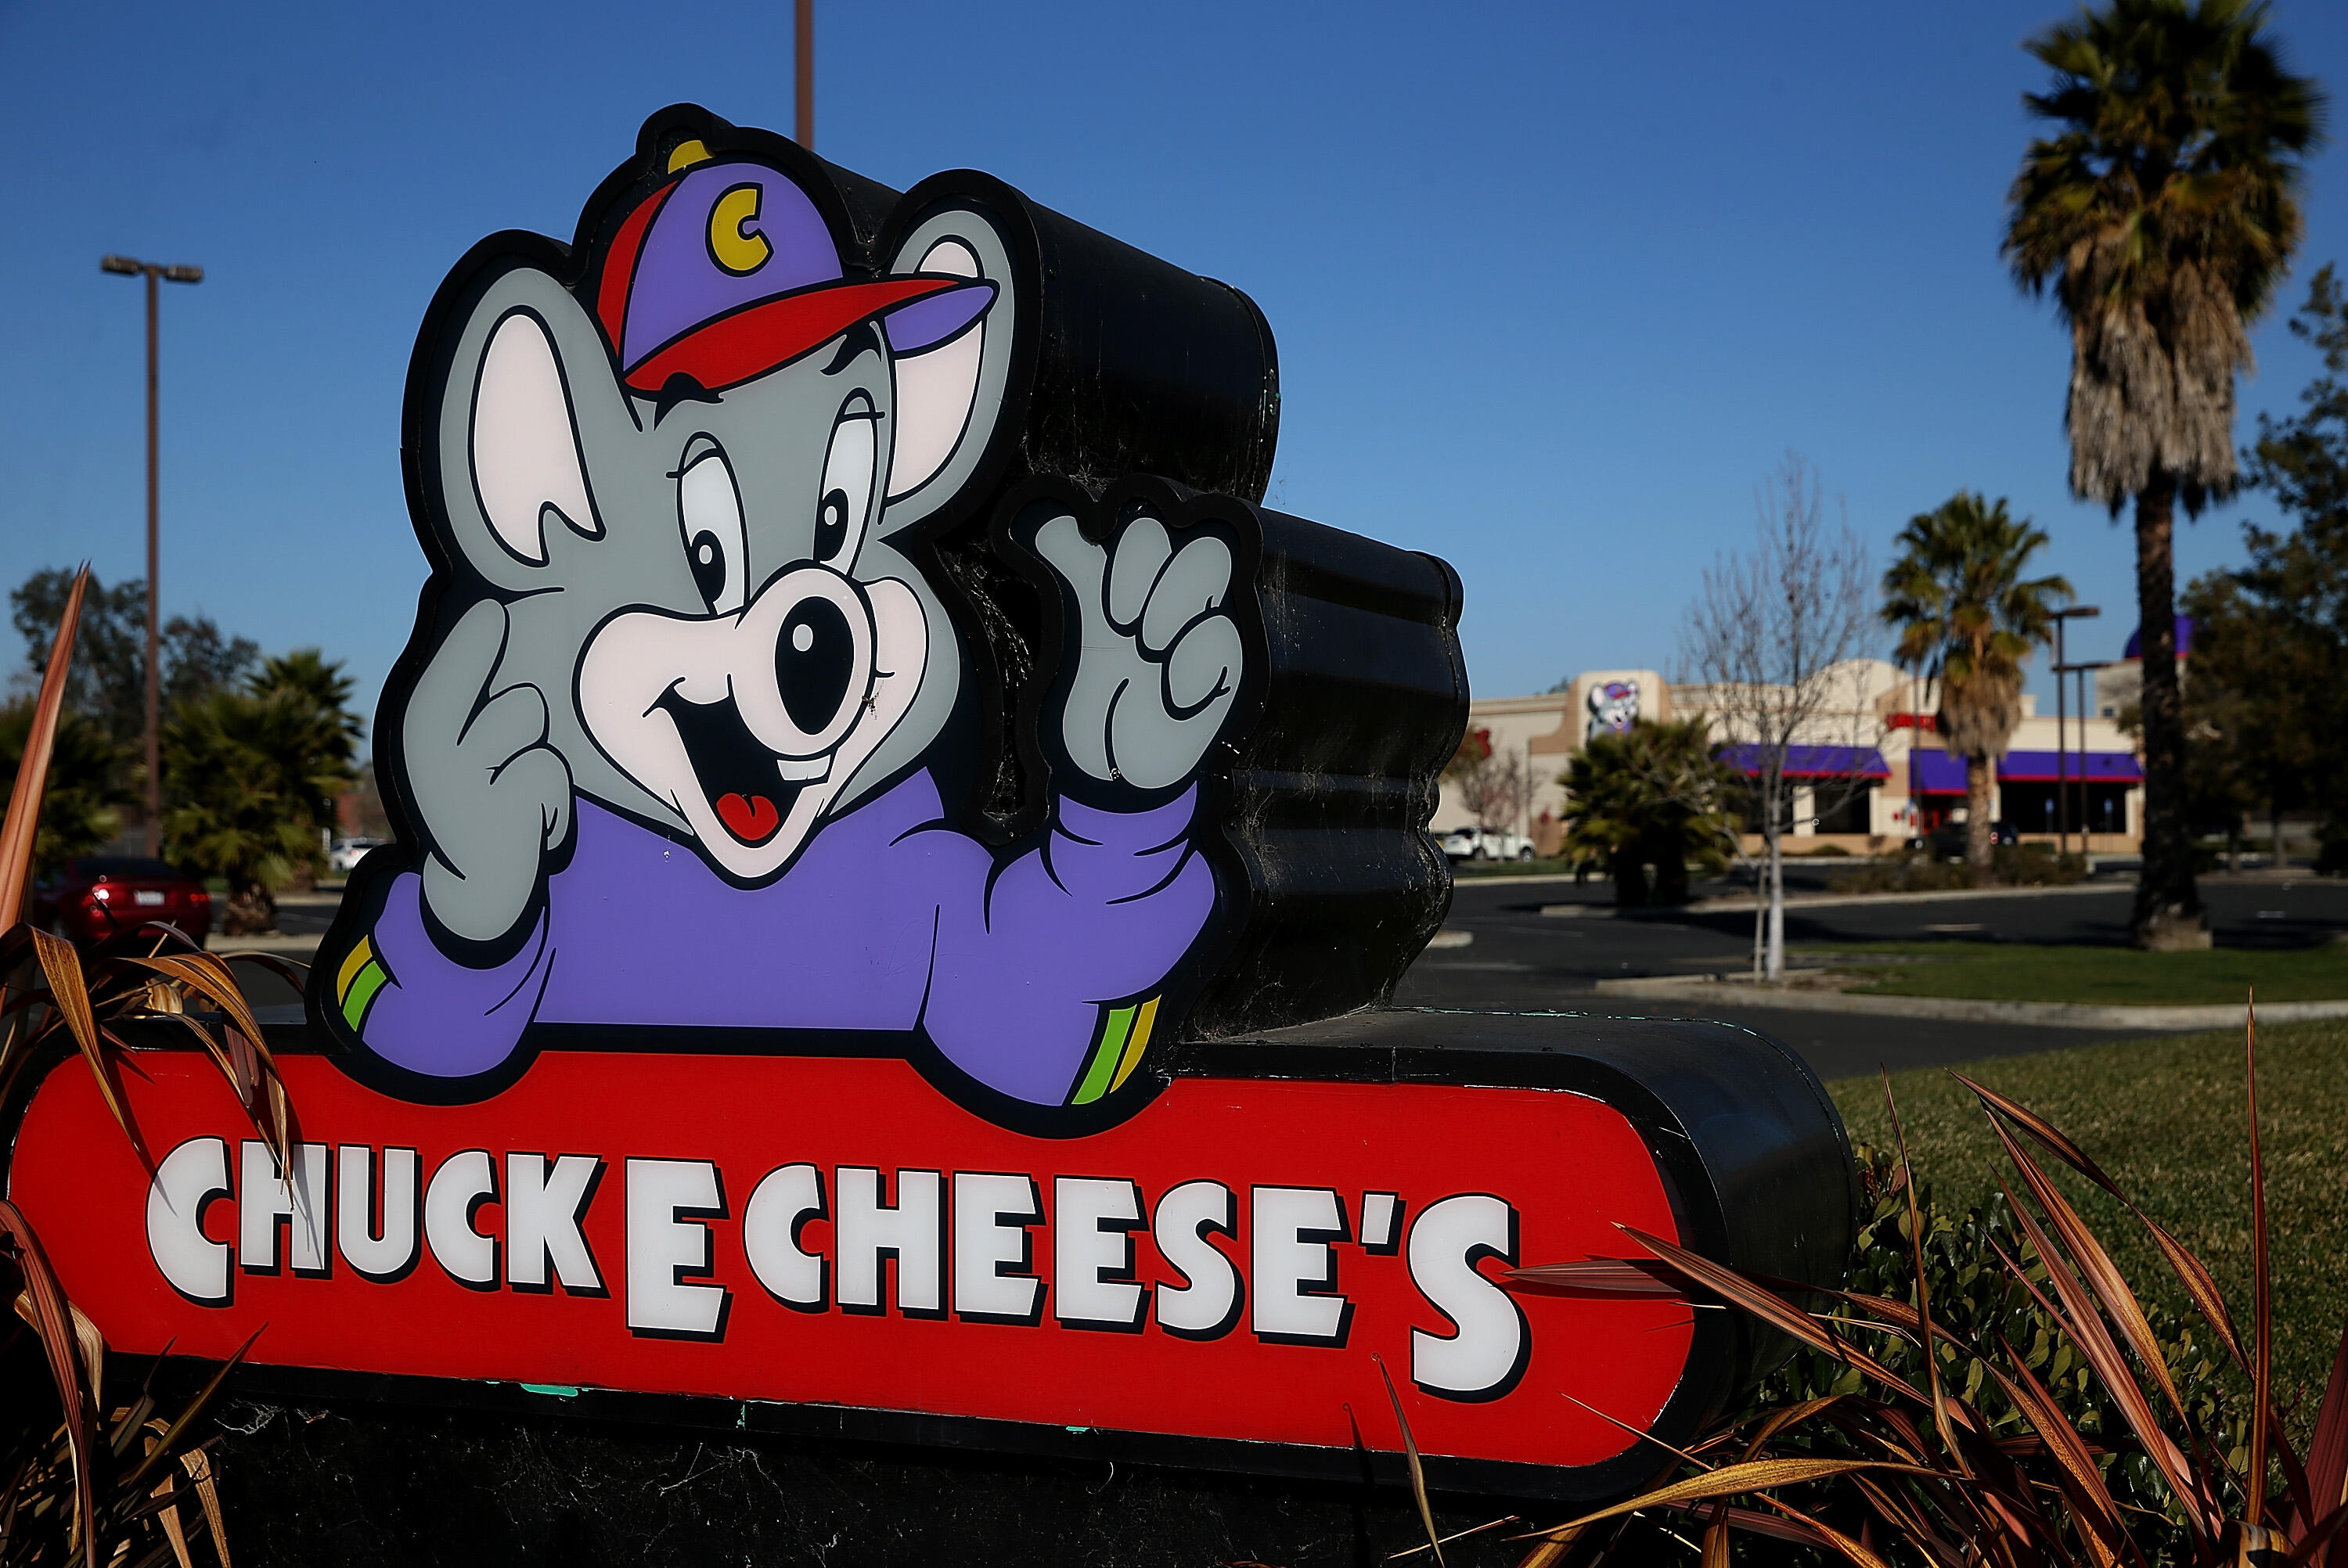 Conspiracy Theory About Chuck E. Cheese Pizza Has Gone Viral - Thumbnail Image